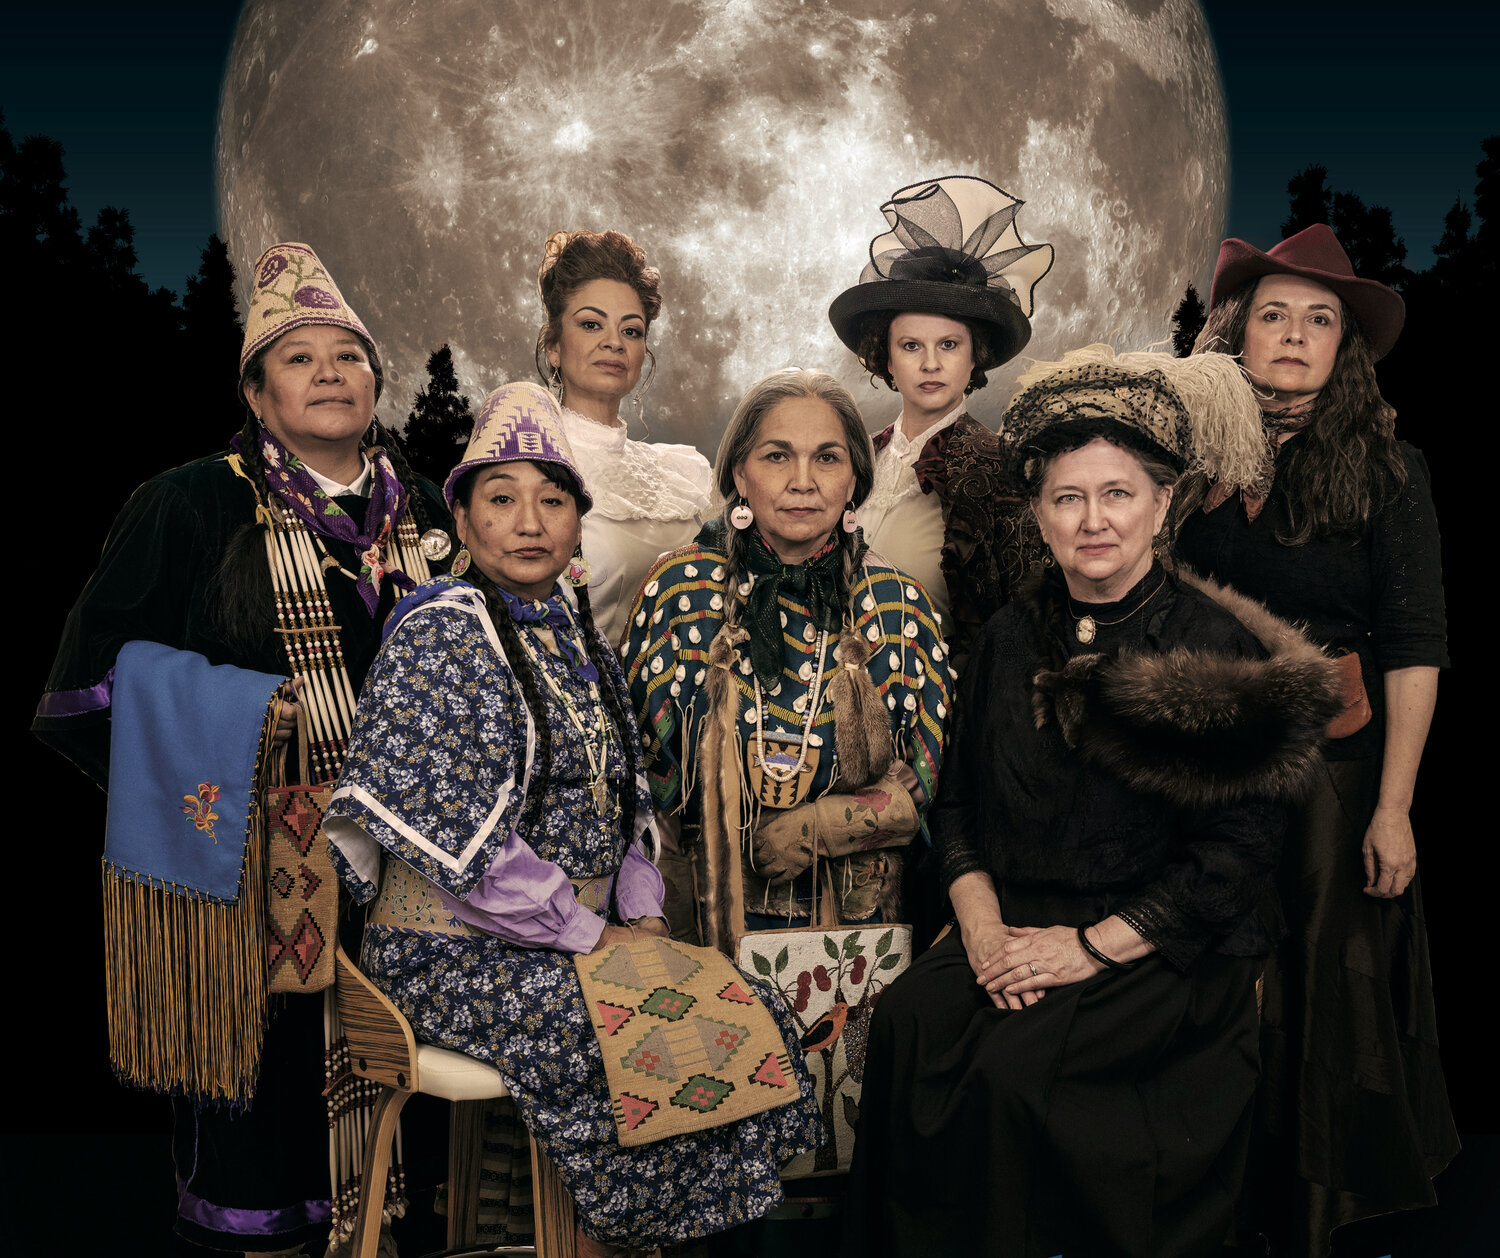 “Dangerous women” of diverse cultures will have their third performance at Icicle Creek Center for the Arts, May 19-21
Photo submitted by Rhona Baron